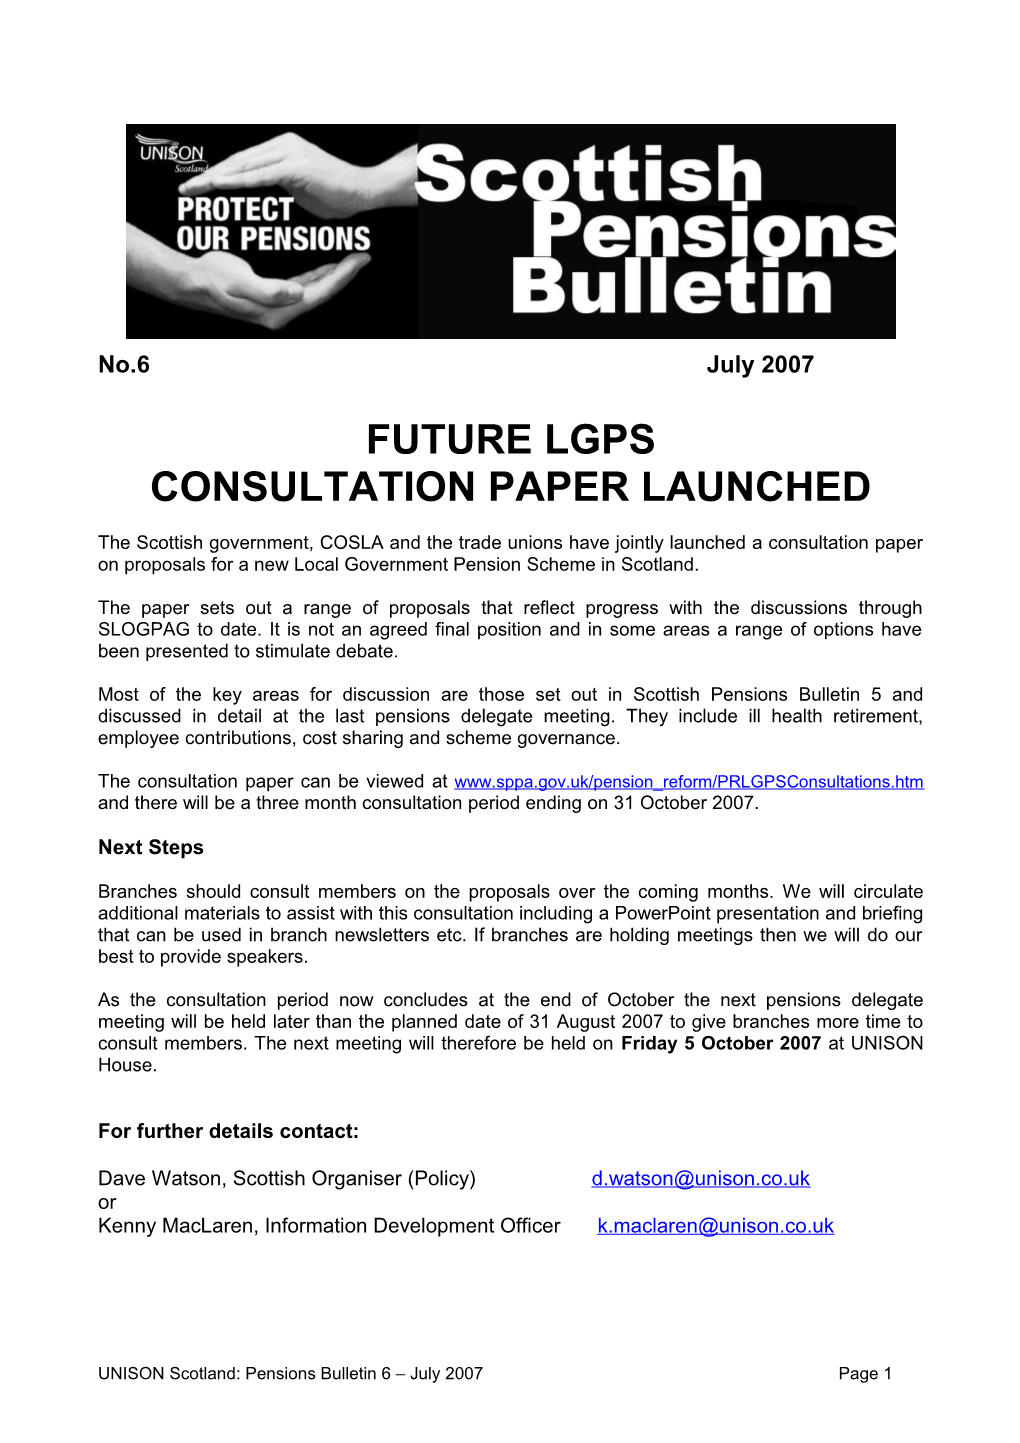 This Newsletter Aims to Highlight the Main Proposals for the New-Look LGPS and to Provide